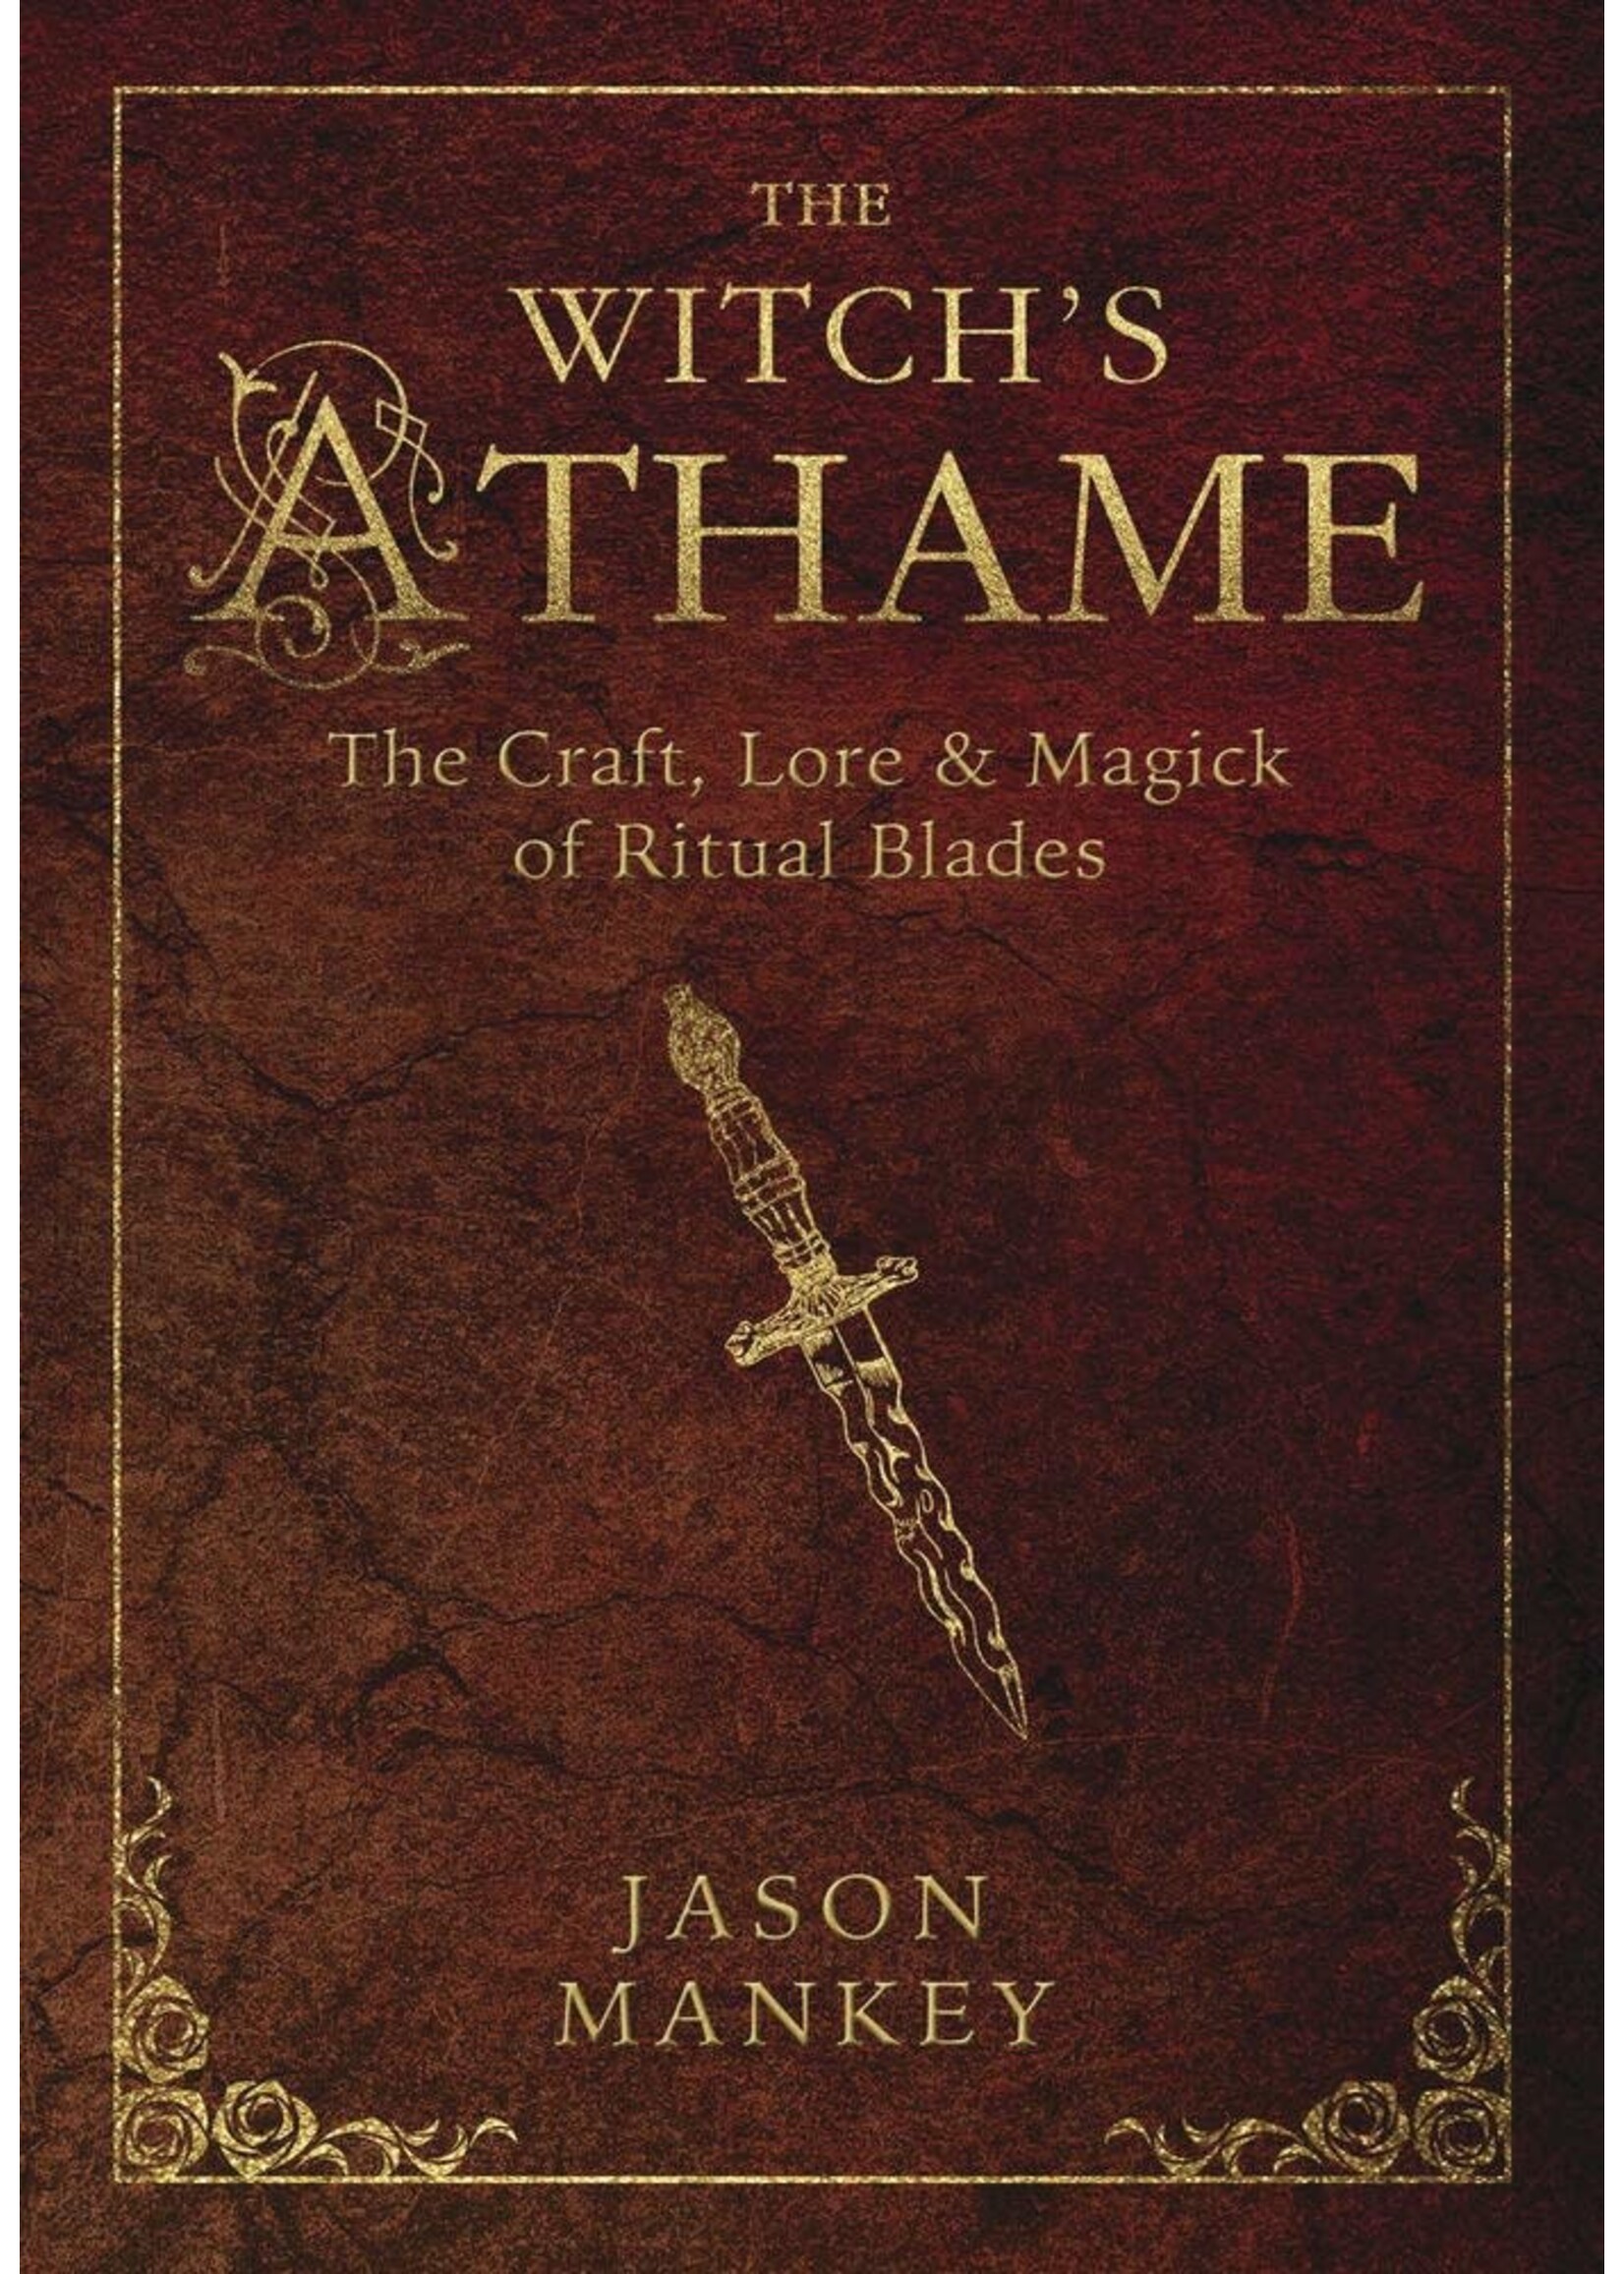 The Witch's Athame: The Craft, Lore, and Magick of Ritual Blades by Jason Mankey